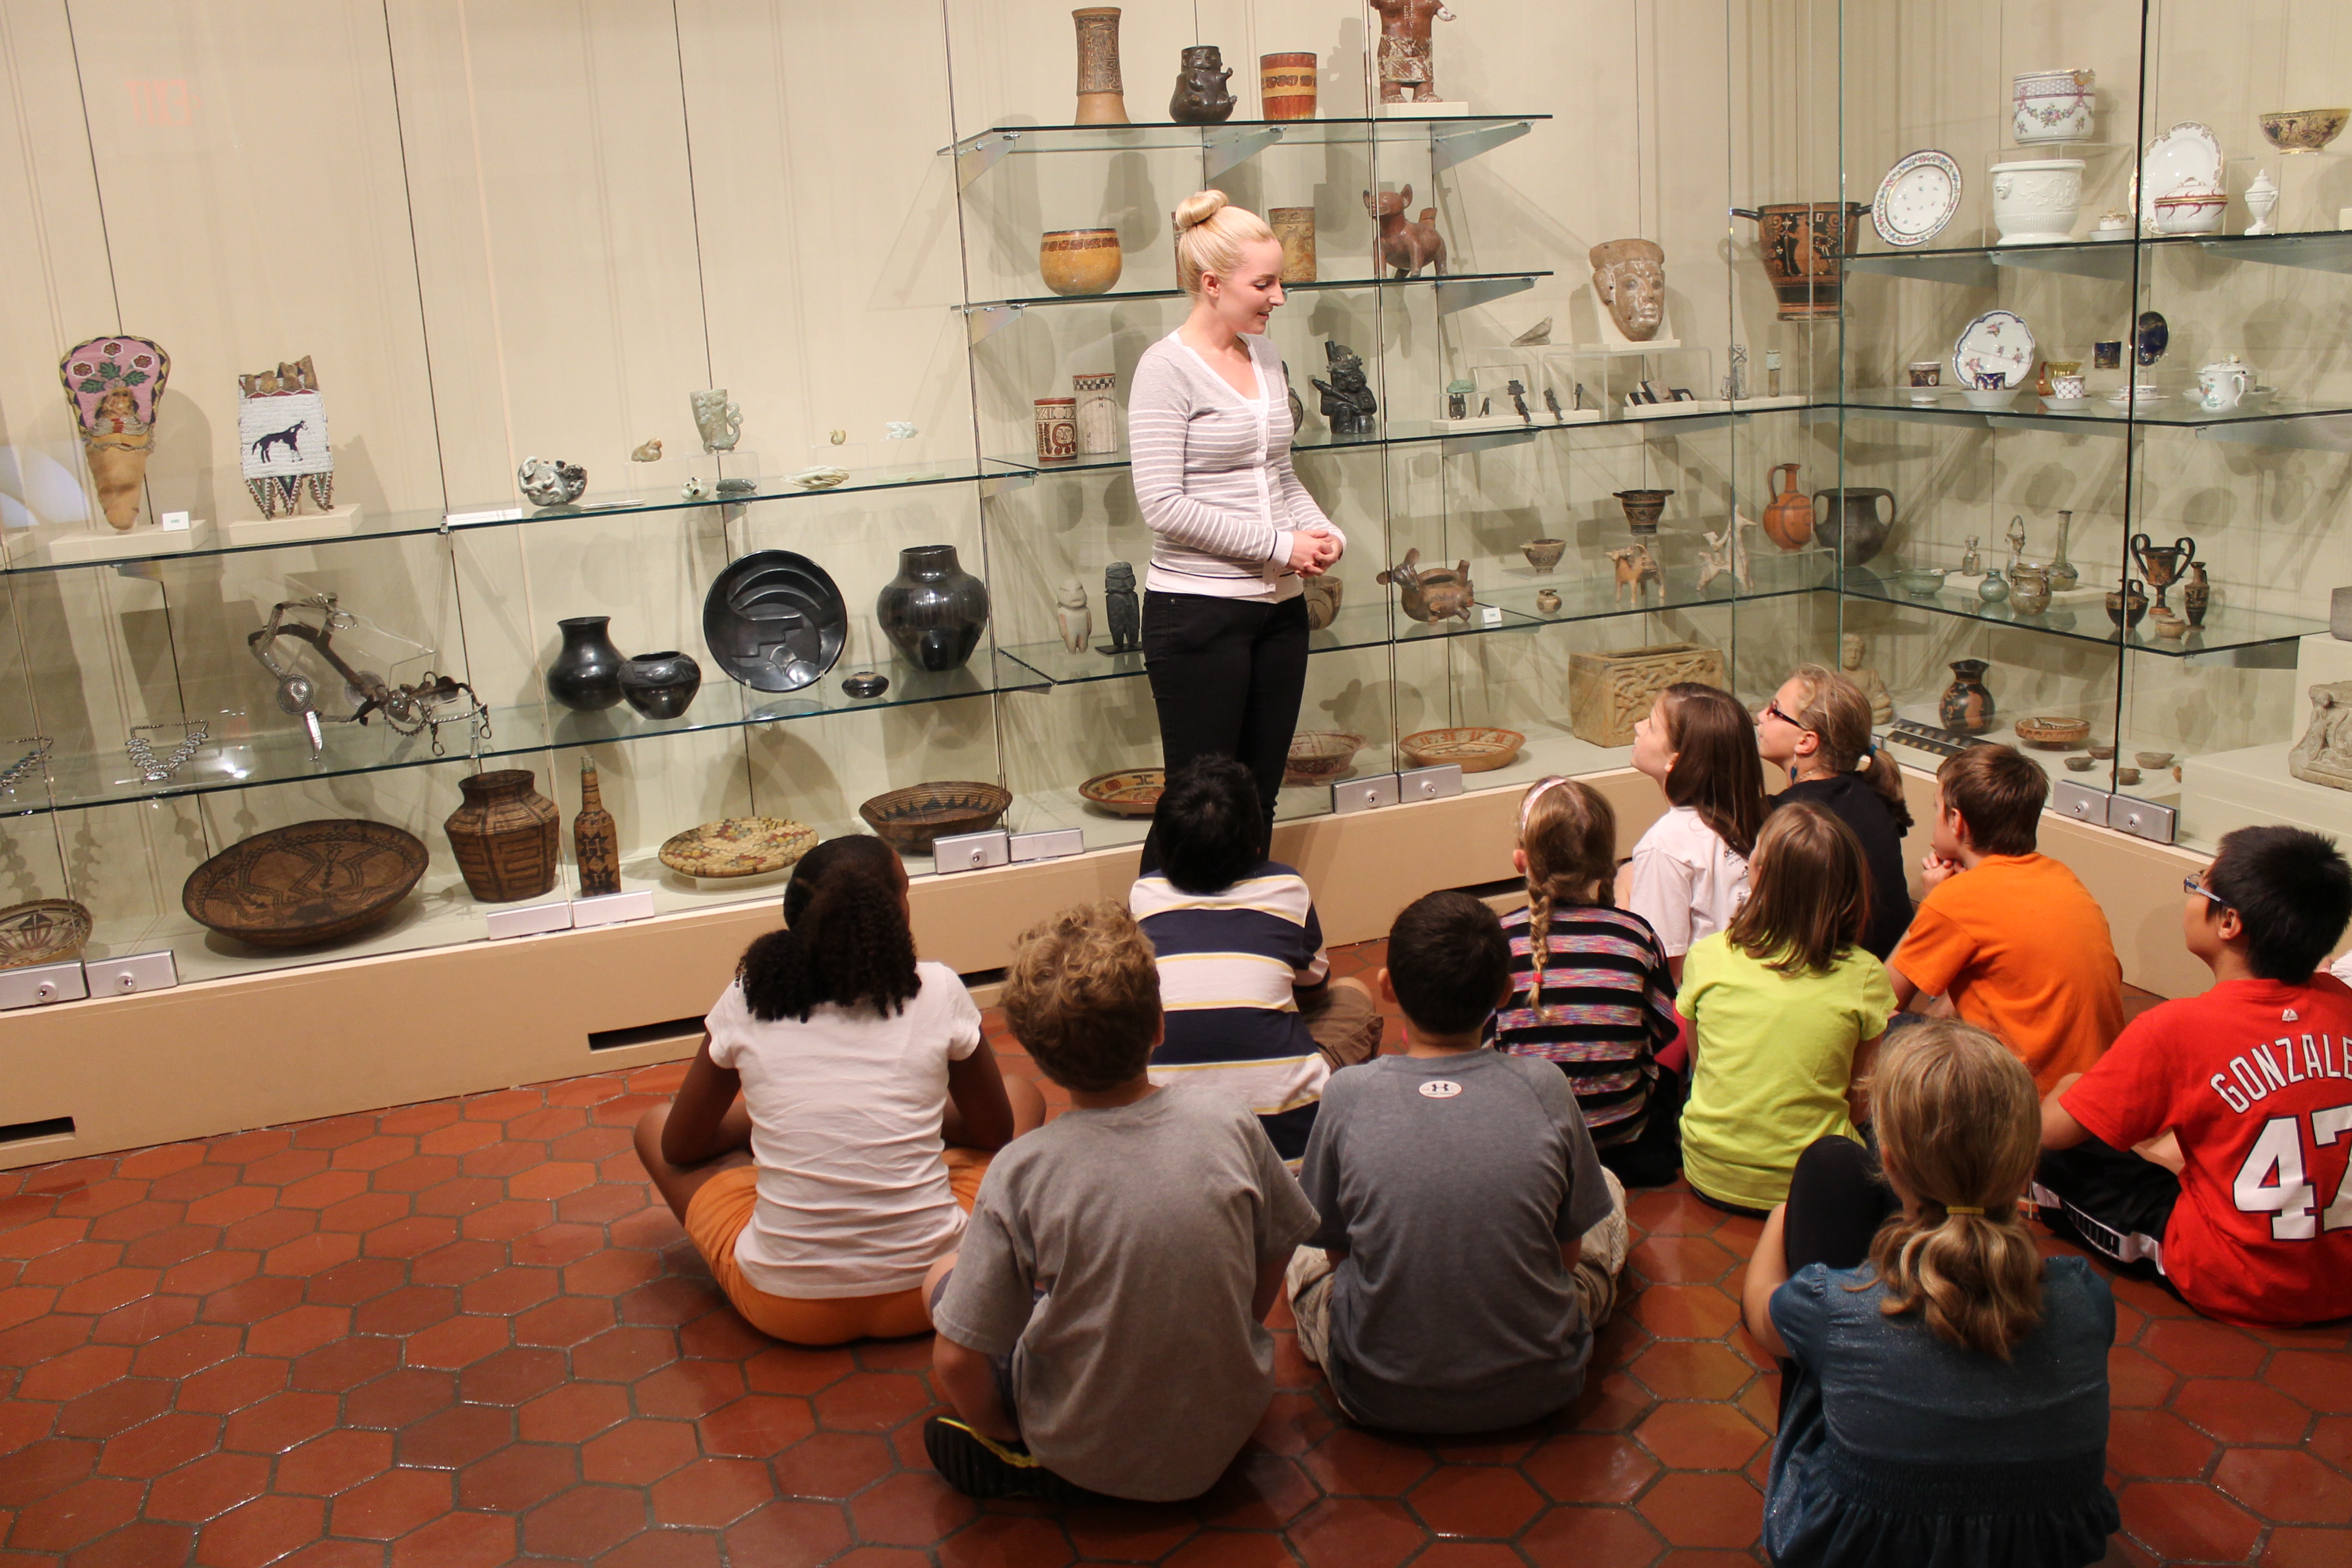 Woman stands talking about various artifacts while children sit on the floor listening